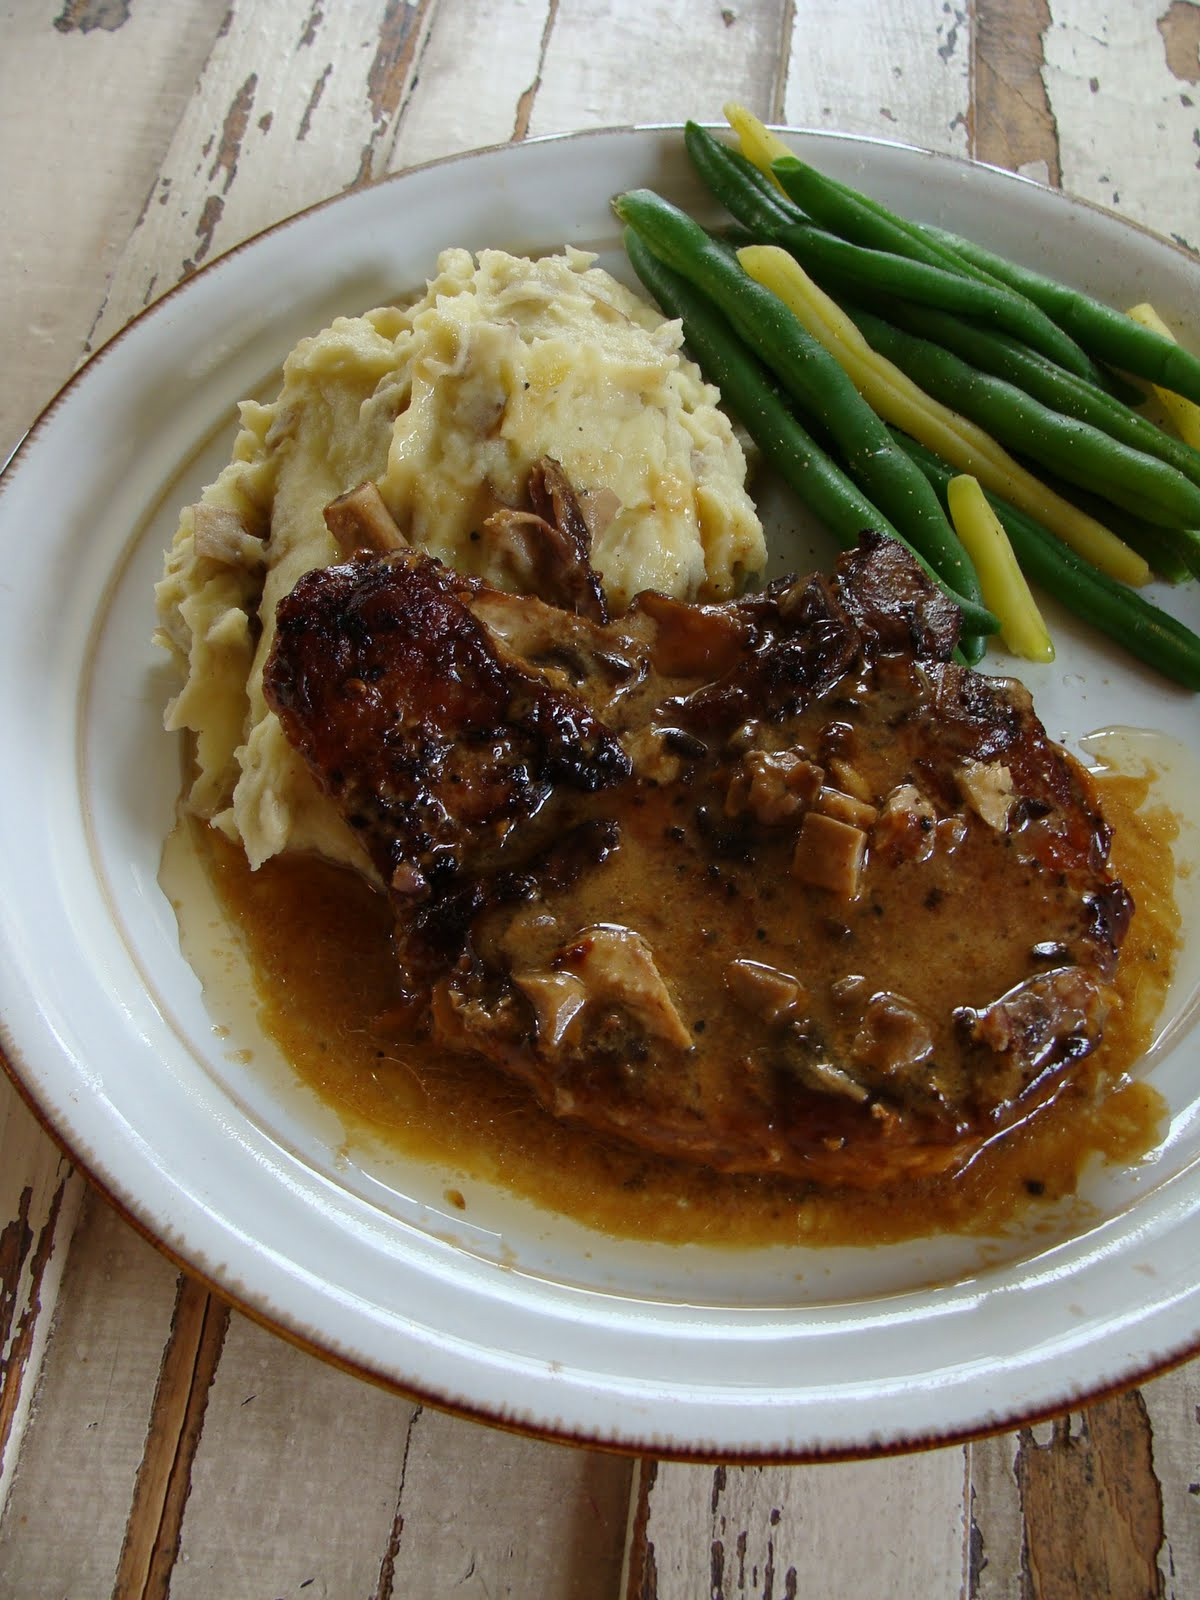 Pork Chops In The Slow Cooker
 Just Cooking Slow Cooker Pork Chops with Mushroom Gravy